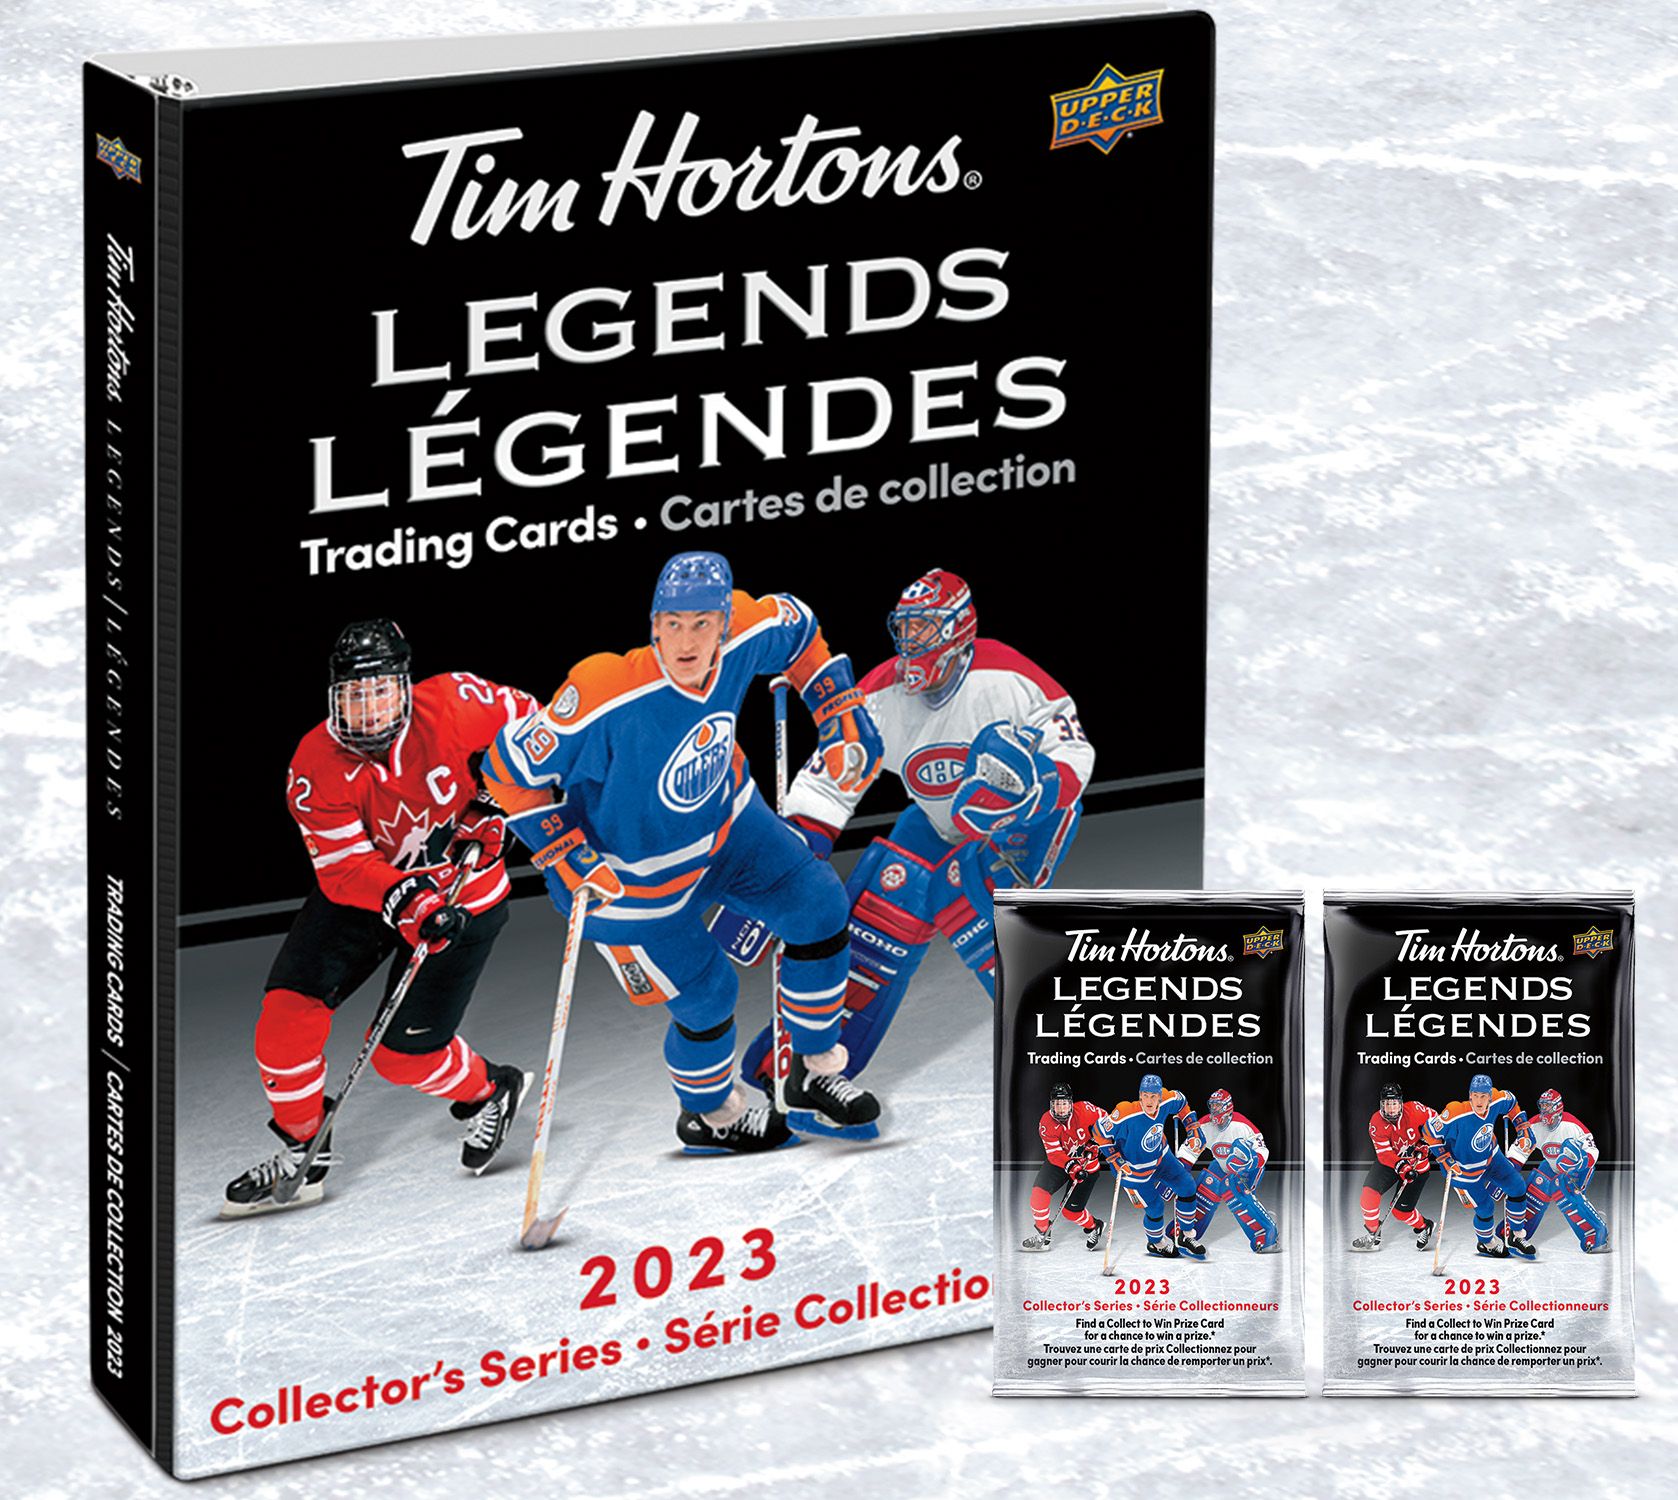 Tims NHL® Trading Cards are back! The new set includes the chance